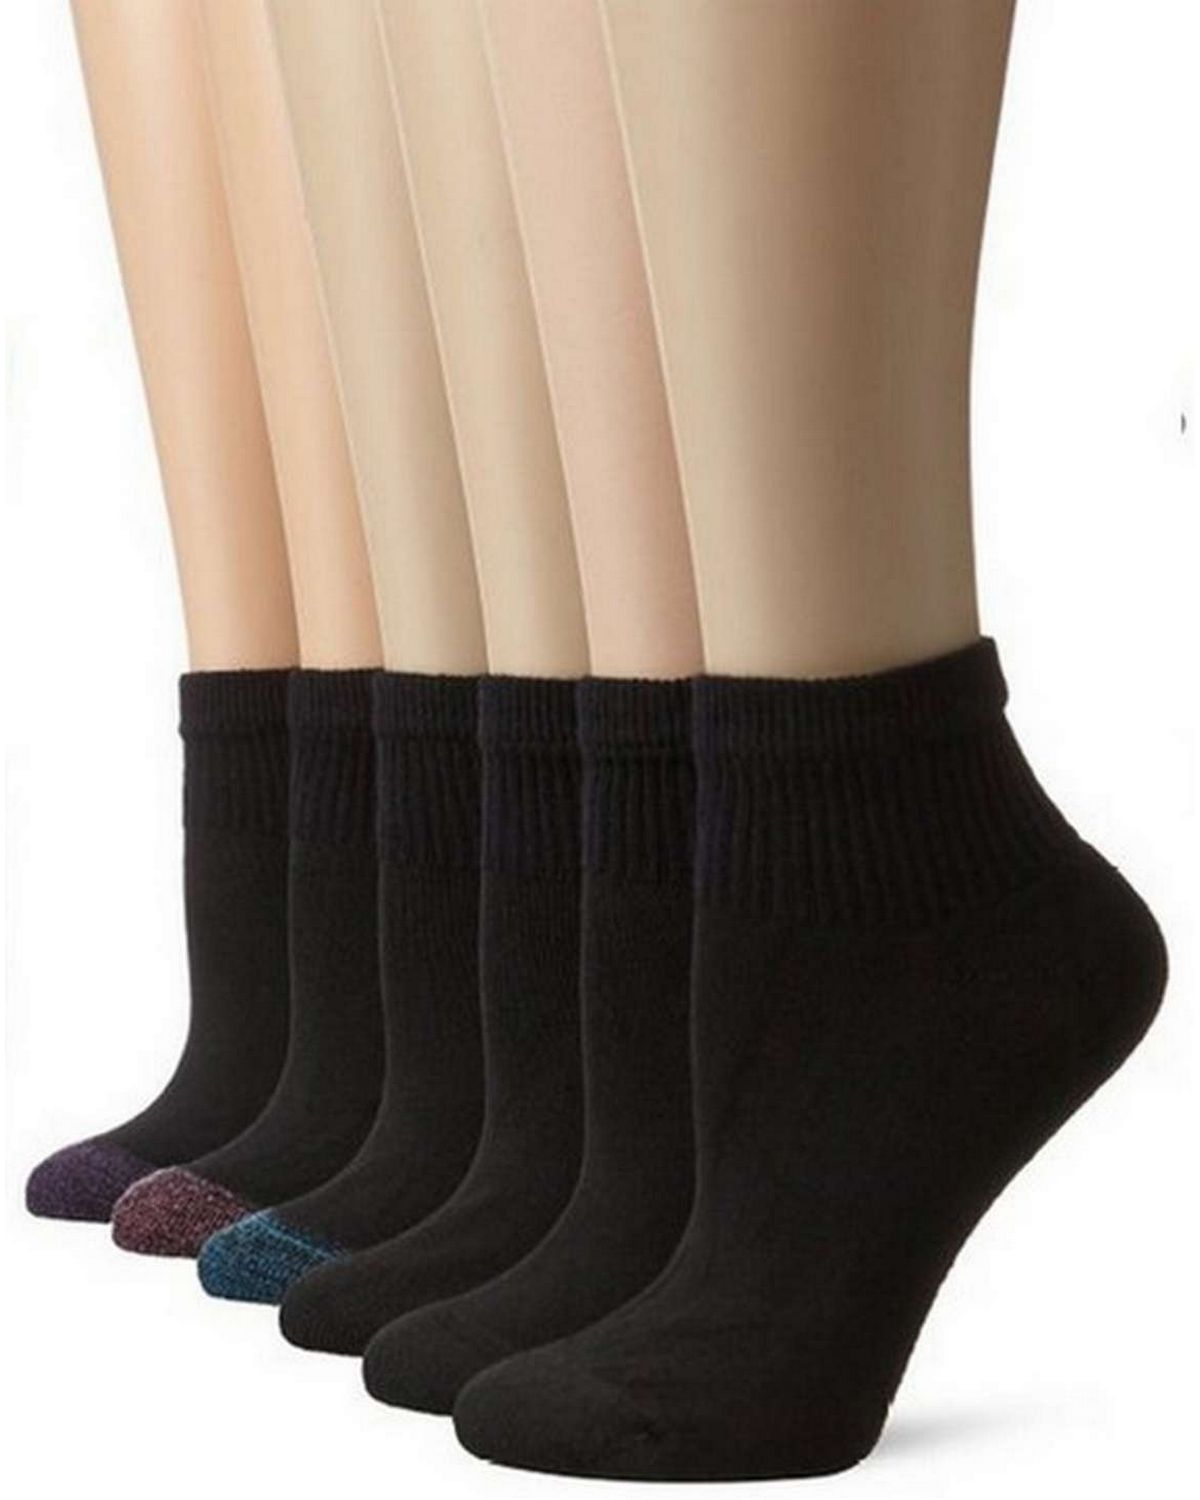 Hanes 6816 Womens Cushion Ankle Sock (Pack of 6)